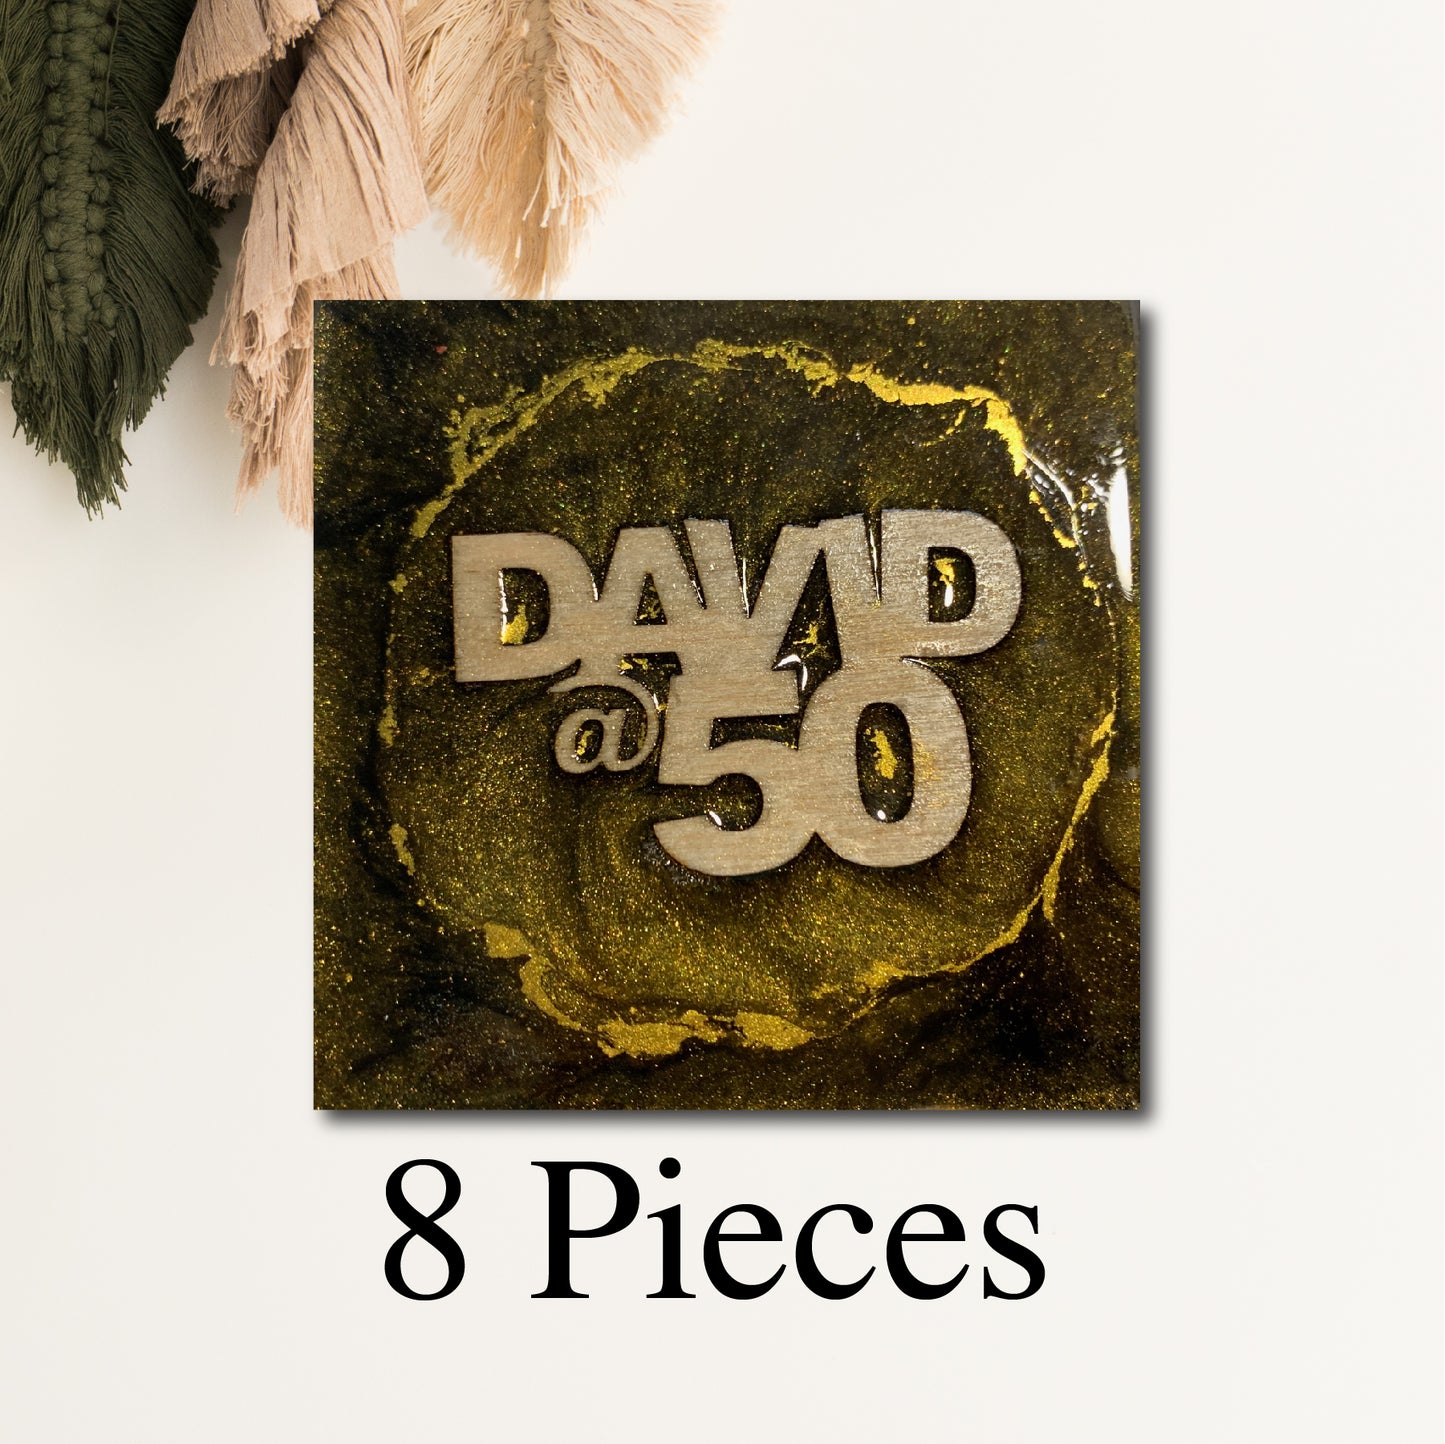 50 birthday party favors, 8 Pieces custom wood coasters, custom wood coaster, birthday, party favors, 50th birthday, birthday party favors